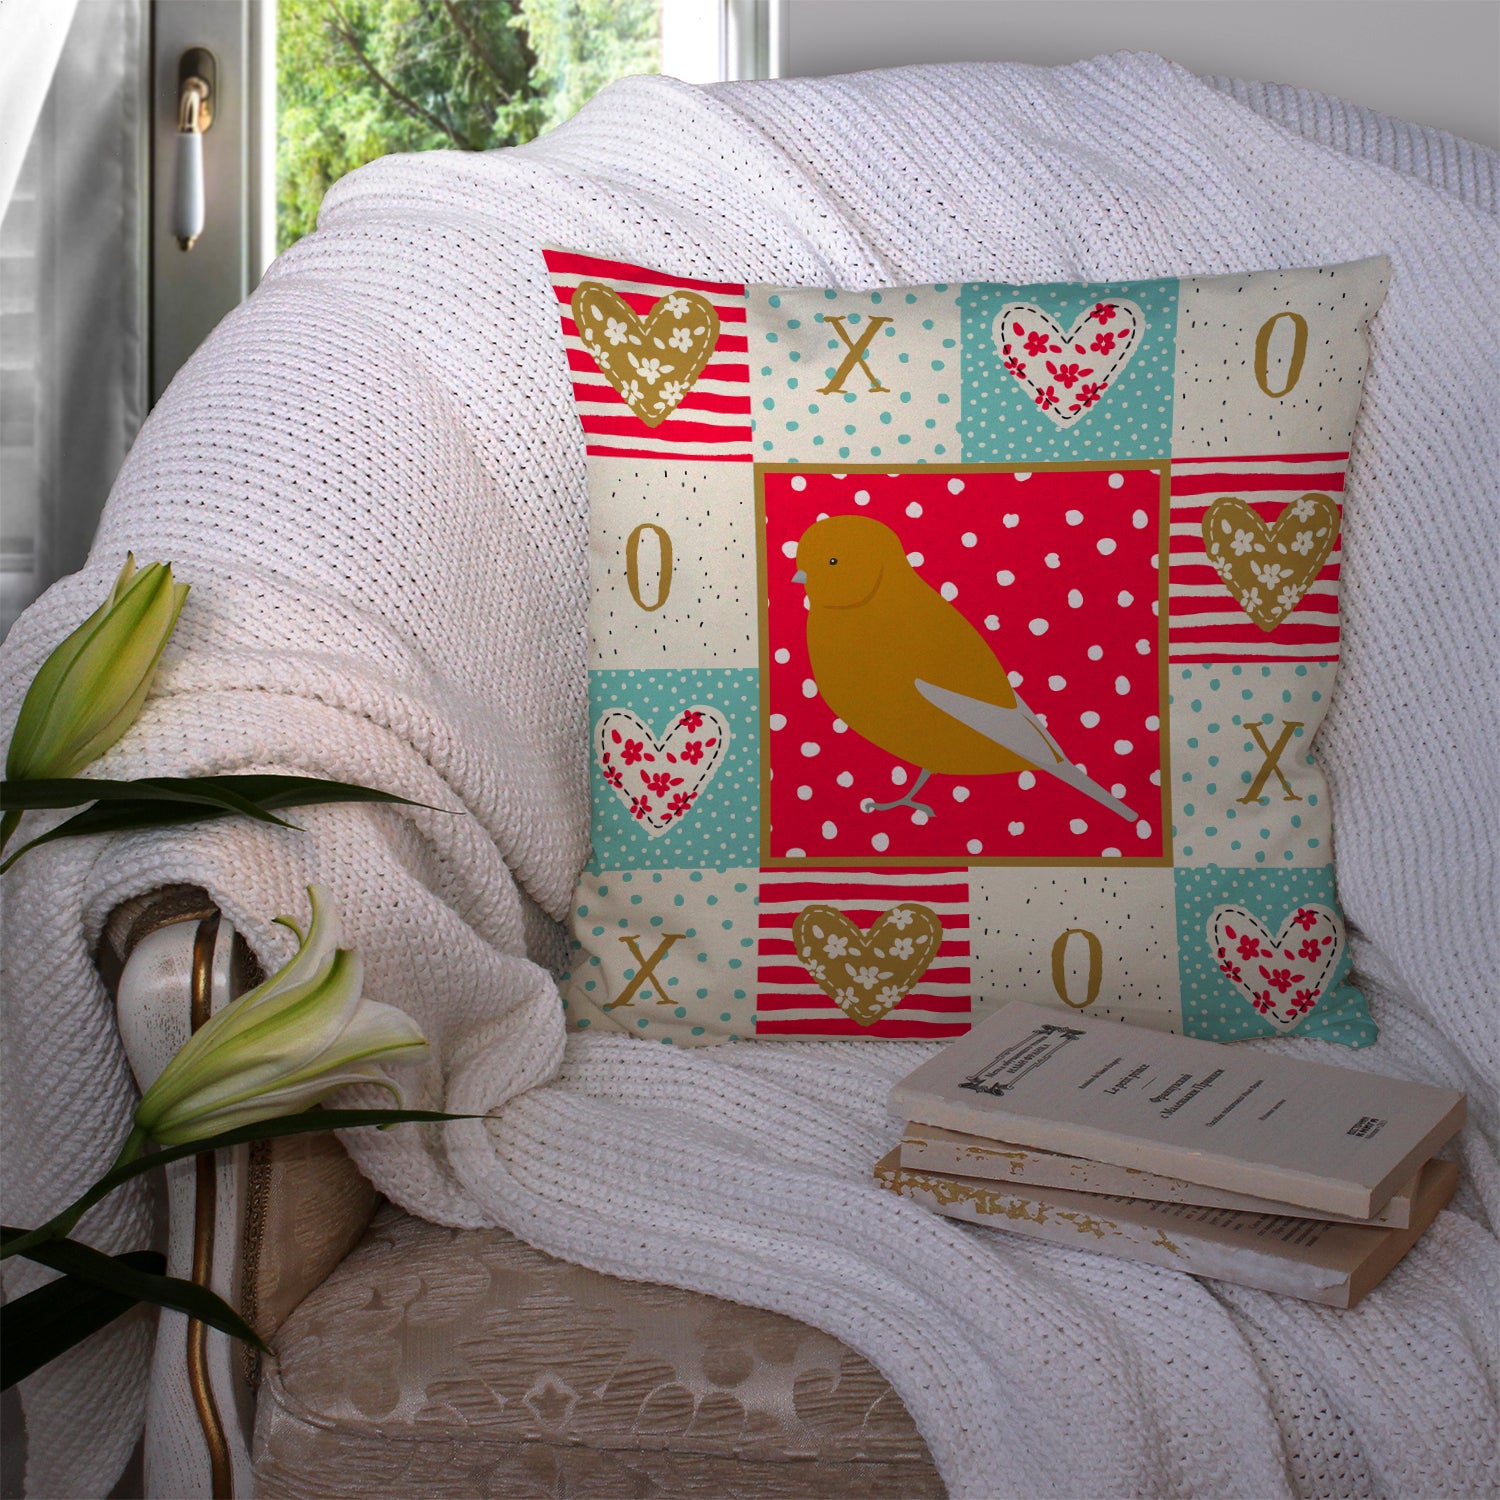 Norwich Canary Love Fabric Decorative Pillow CK5506PW1414 - the-store.com